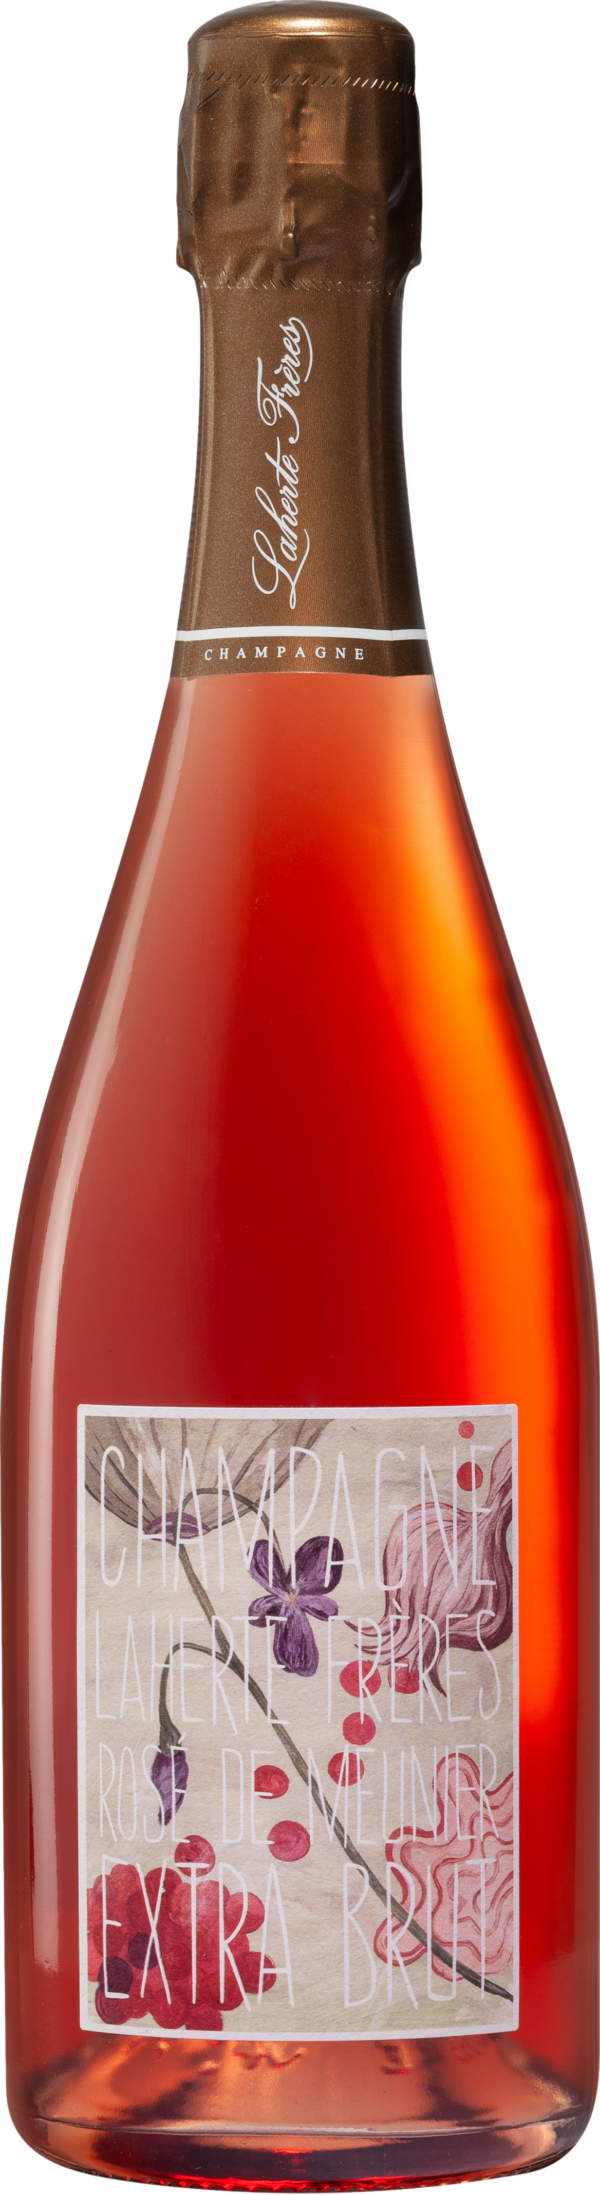 Product image of Champagne Laherte Freres Rose de Menuer from 8wines